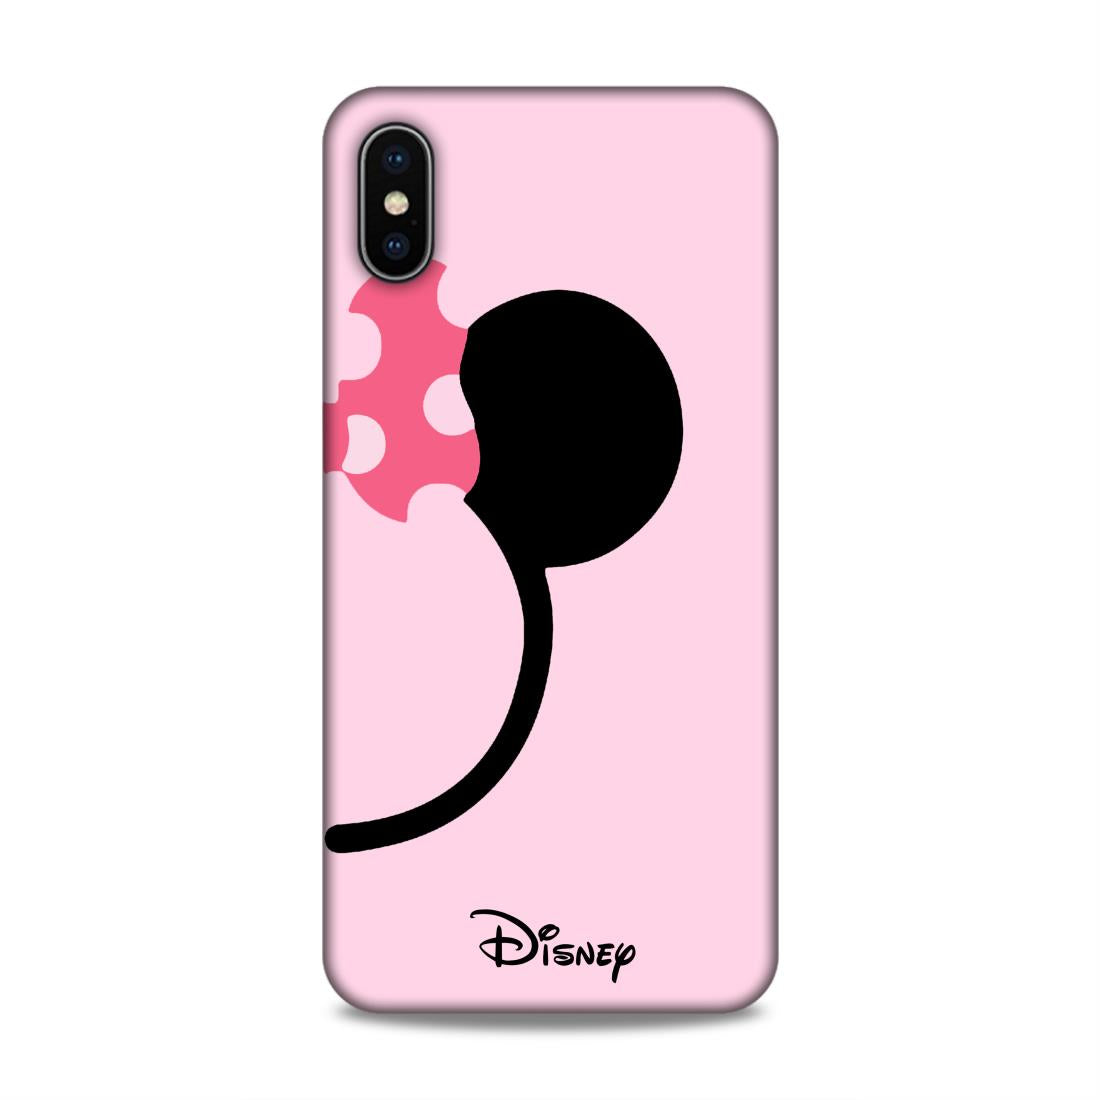 Disney Hard Back Case For Apple iPhone XS Max